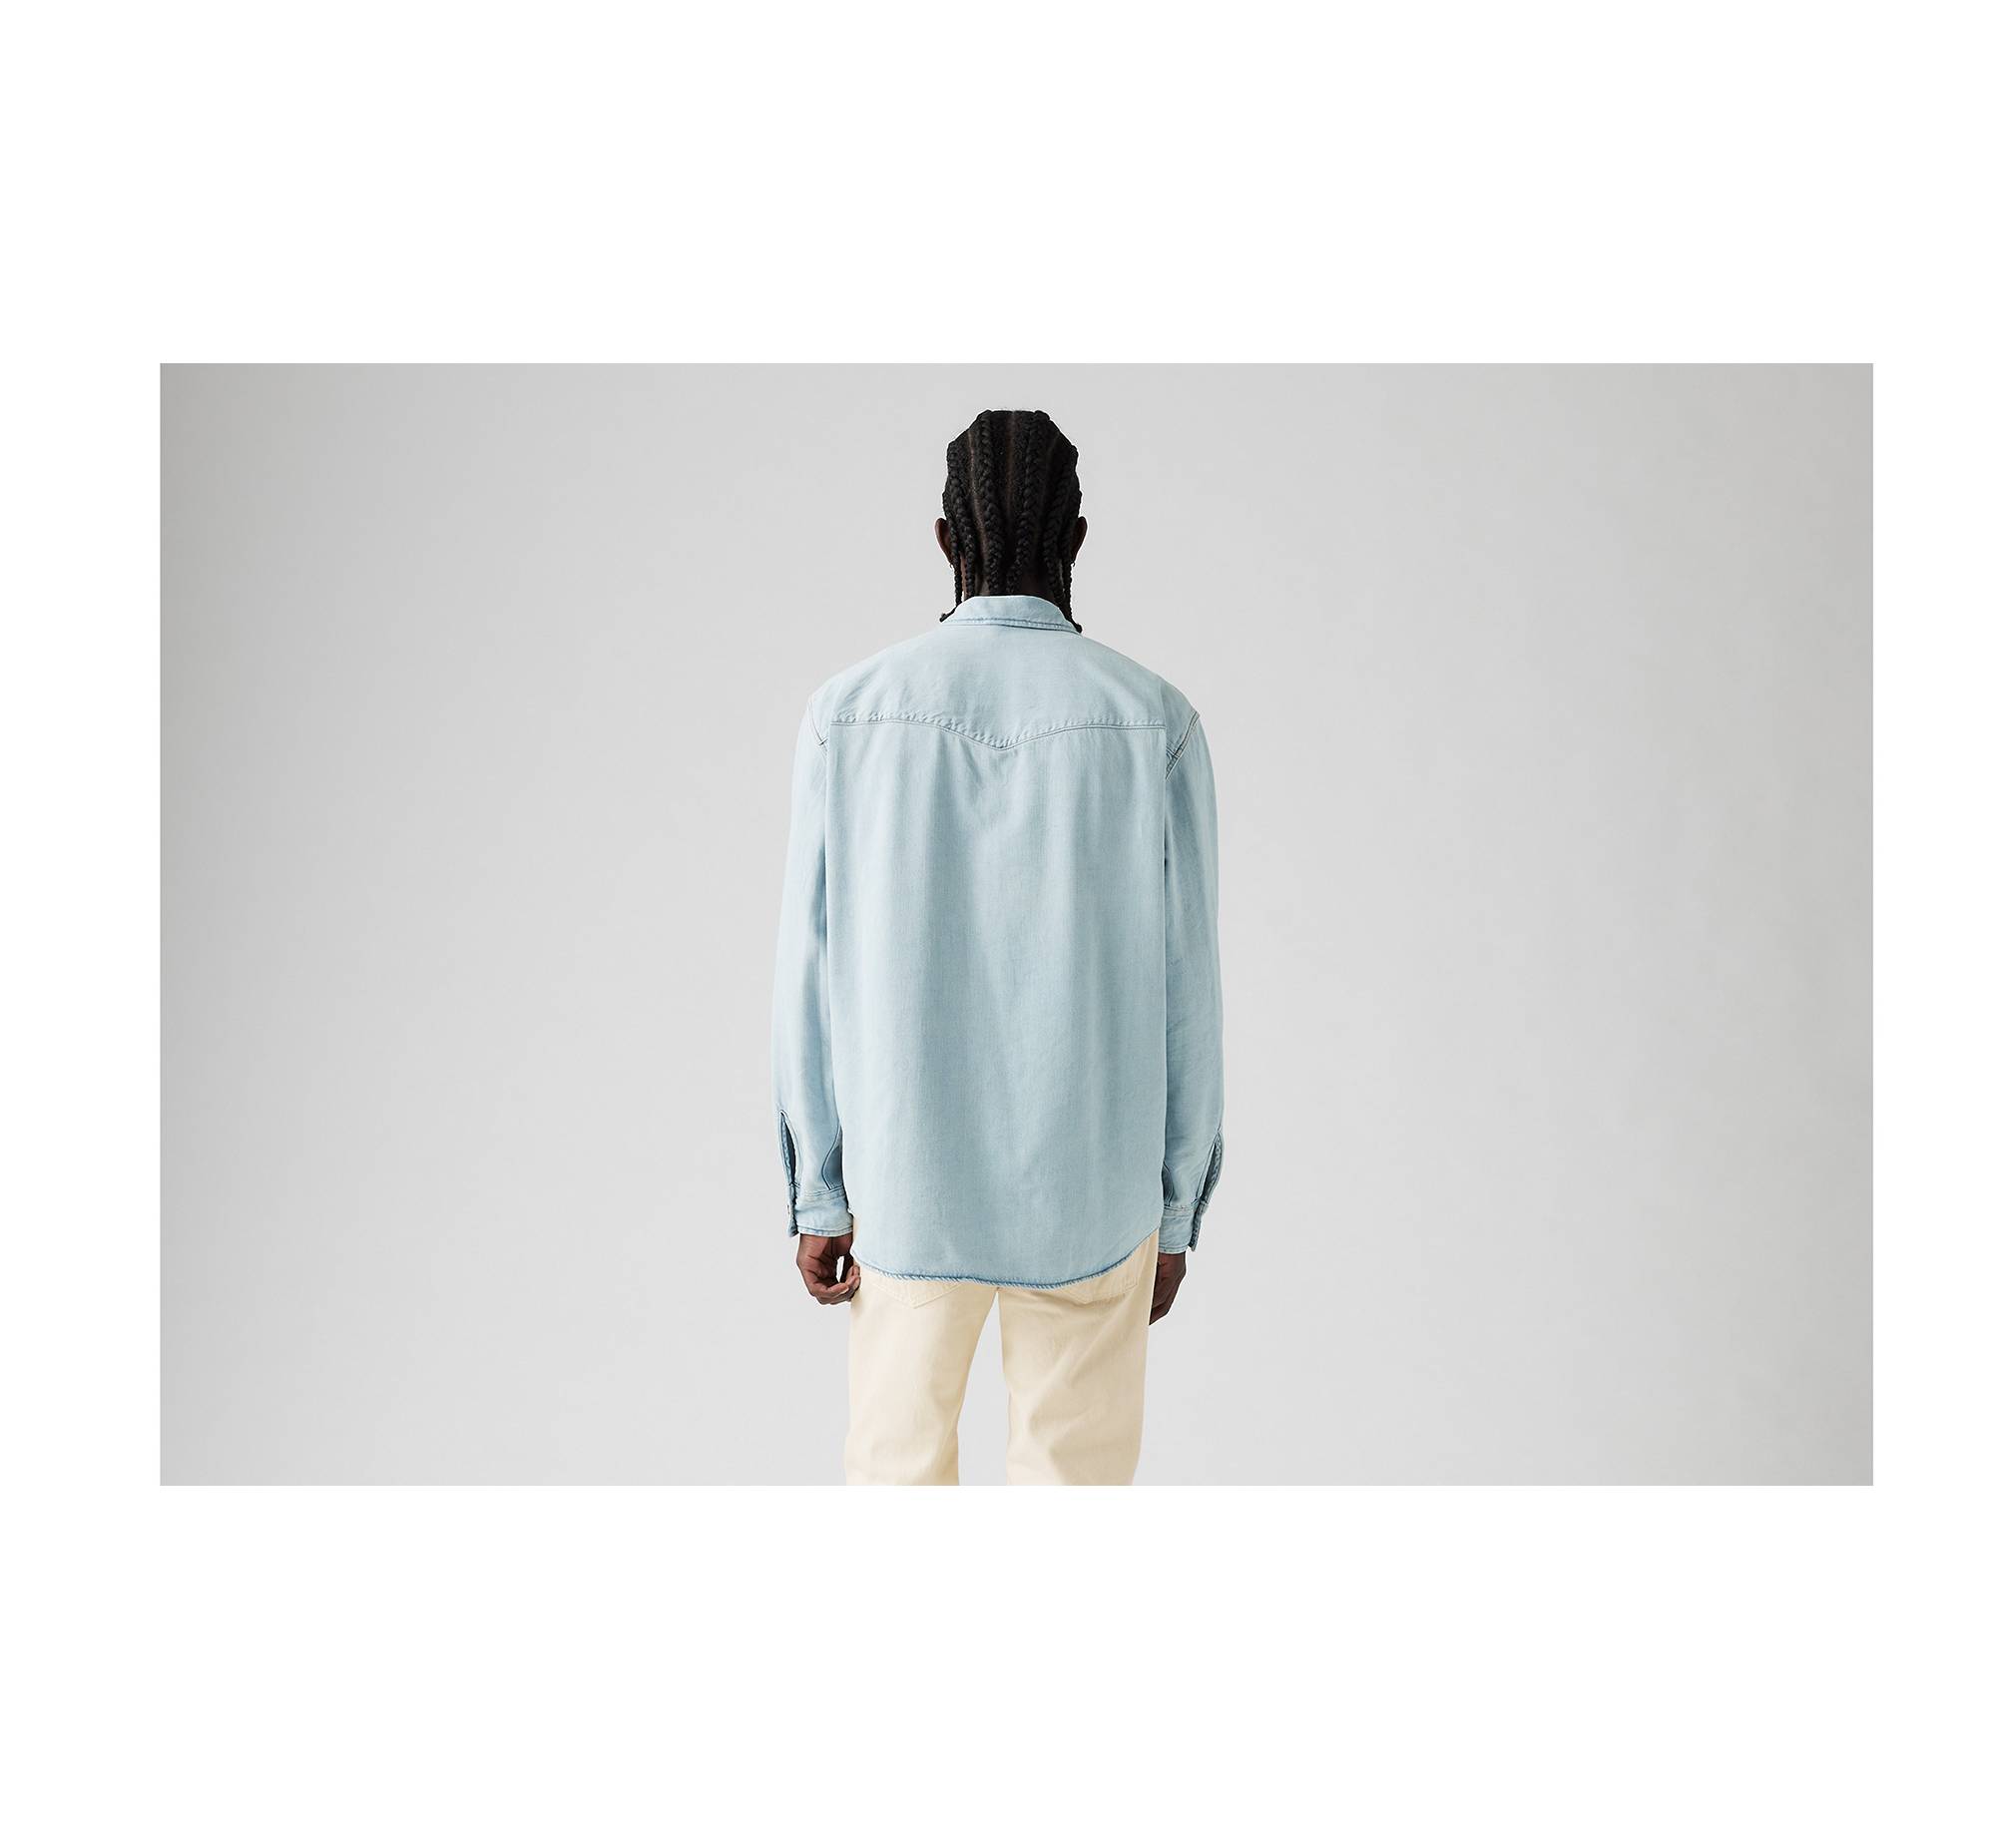 Relaxed Fit Western Shirt - Light Wash | Levi's® US